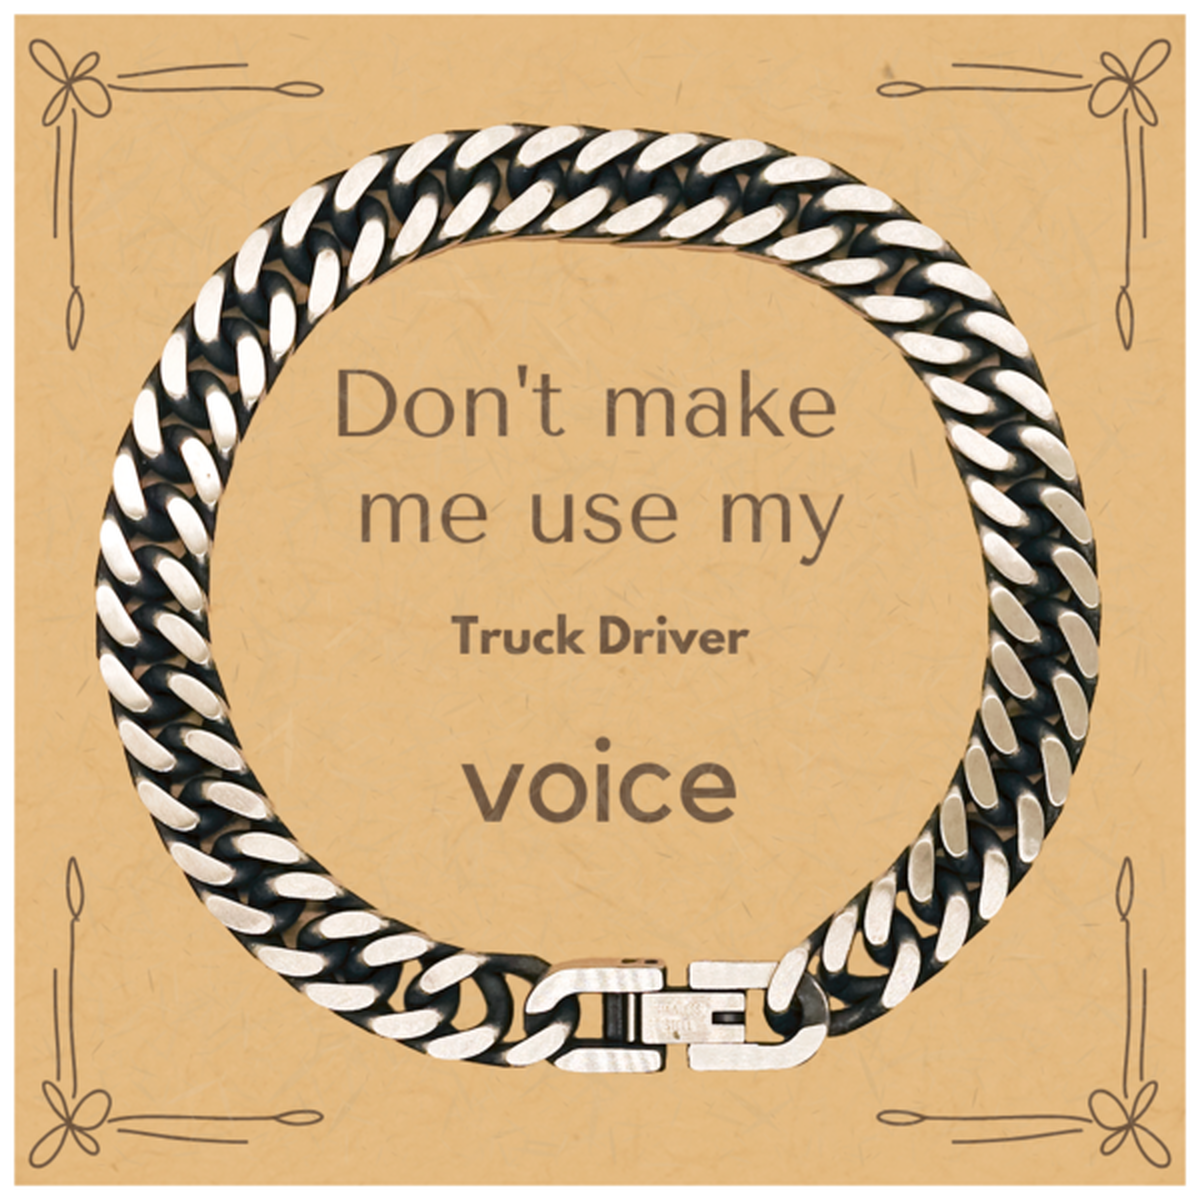 Don't make me use my Truck Driver voice, Sarcasm Truck Driver Card Gifts, Christmas Truck Driver Cuban Link Chain Bracelet Birthday Unique Gifts For Truck Driver Coworkers, Men, Women, Colleague, Friends